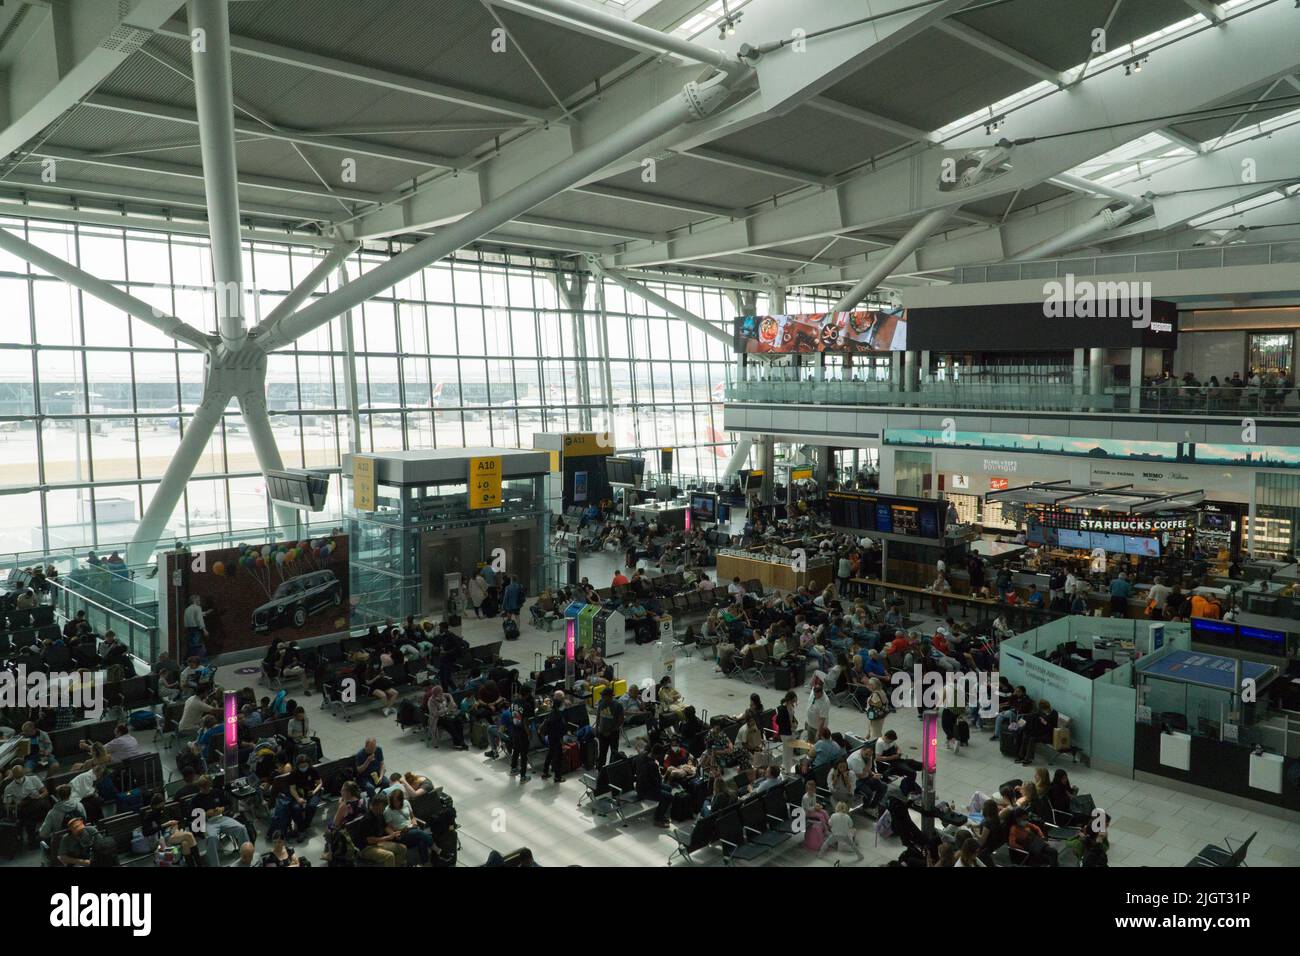 London, UK, 12 July 2022: Crowds and delays at Heathrow's terminal 5 as post-pandemic levels of travellers have left airports short of staff. Anna Watson/Alamy Live News Stock Photo